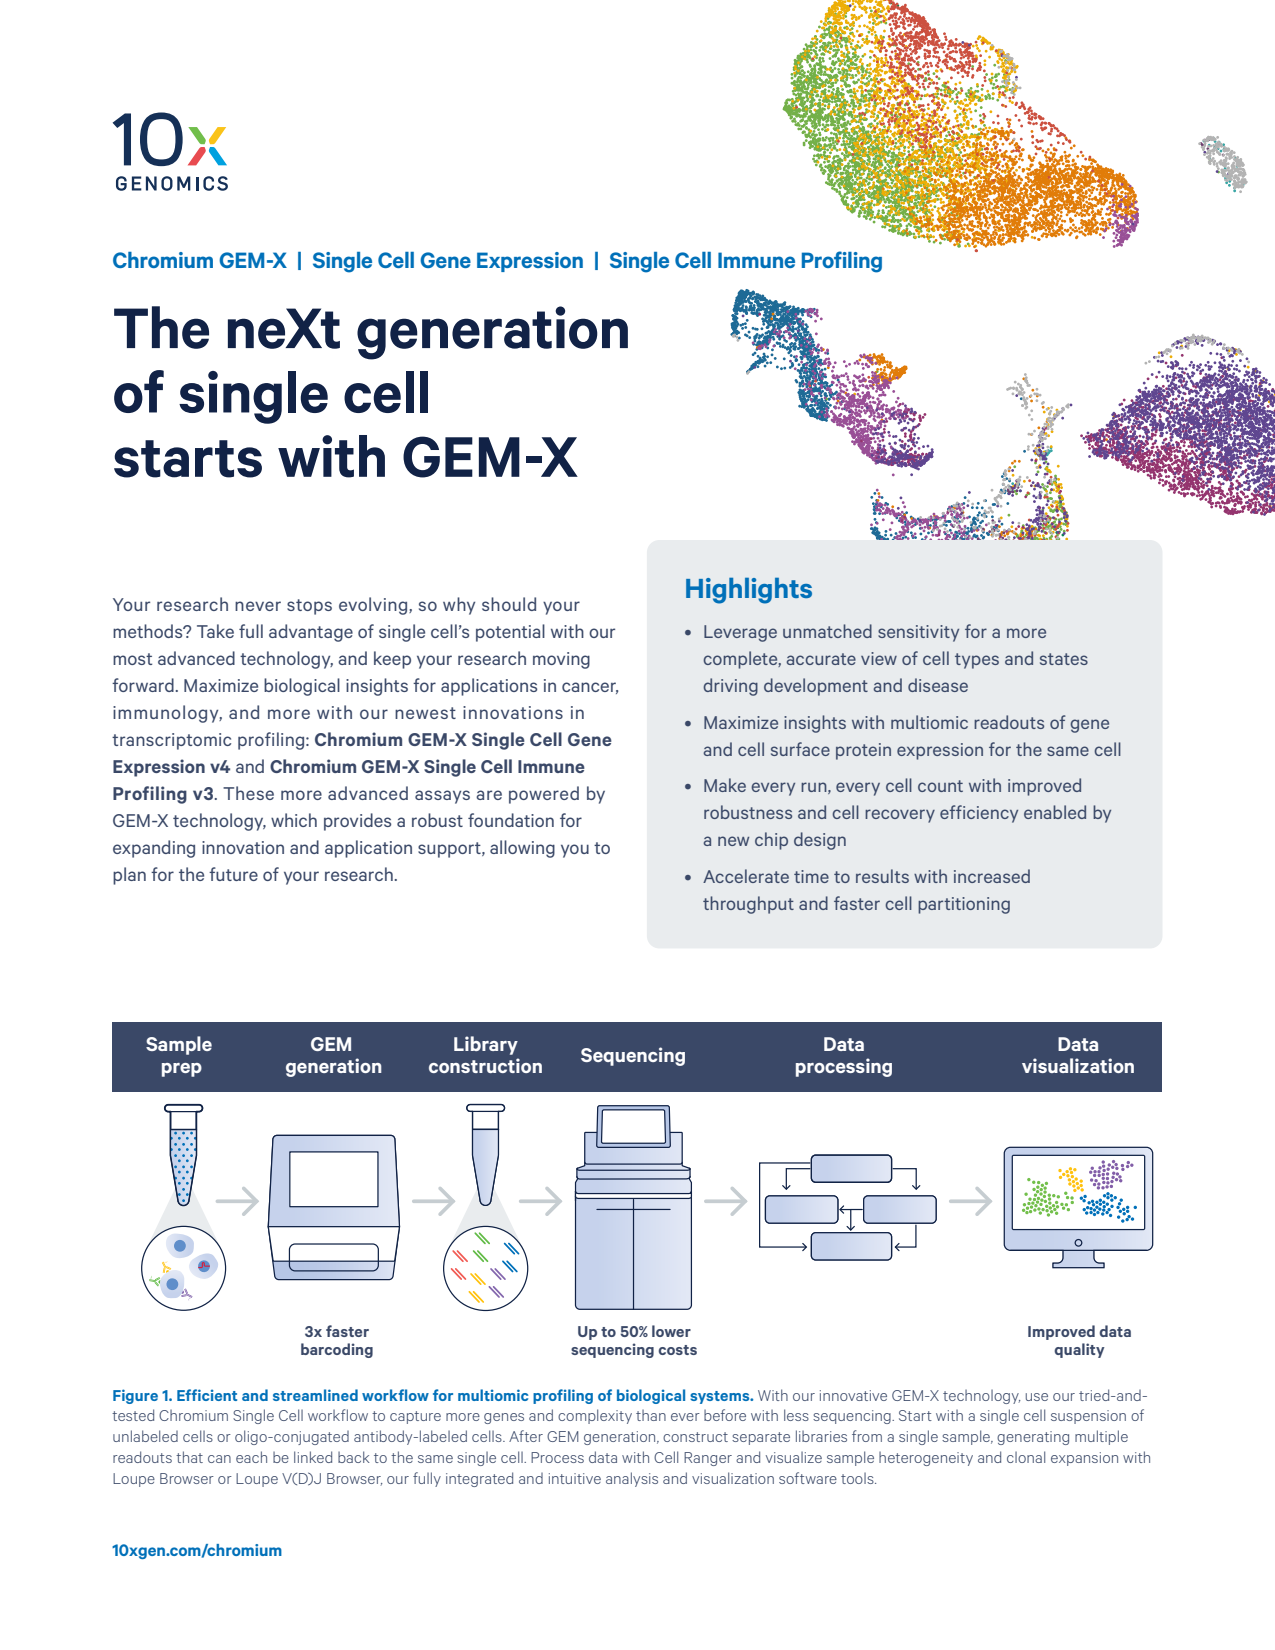 The neXt generation of single cell starts with GEM-X